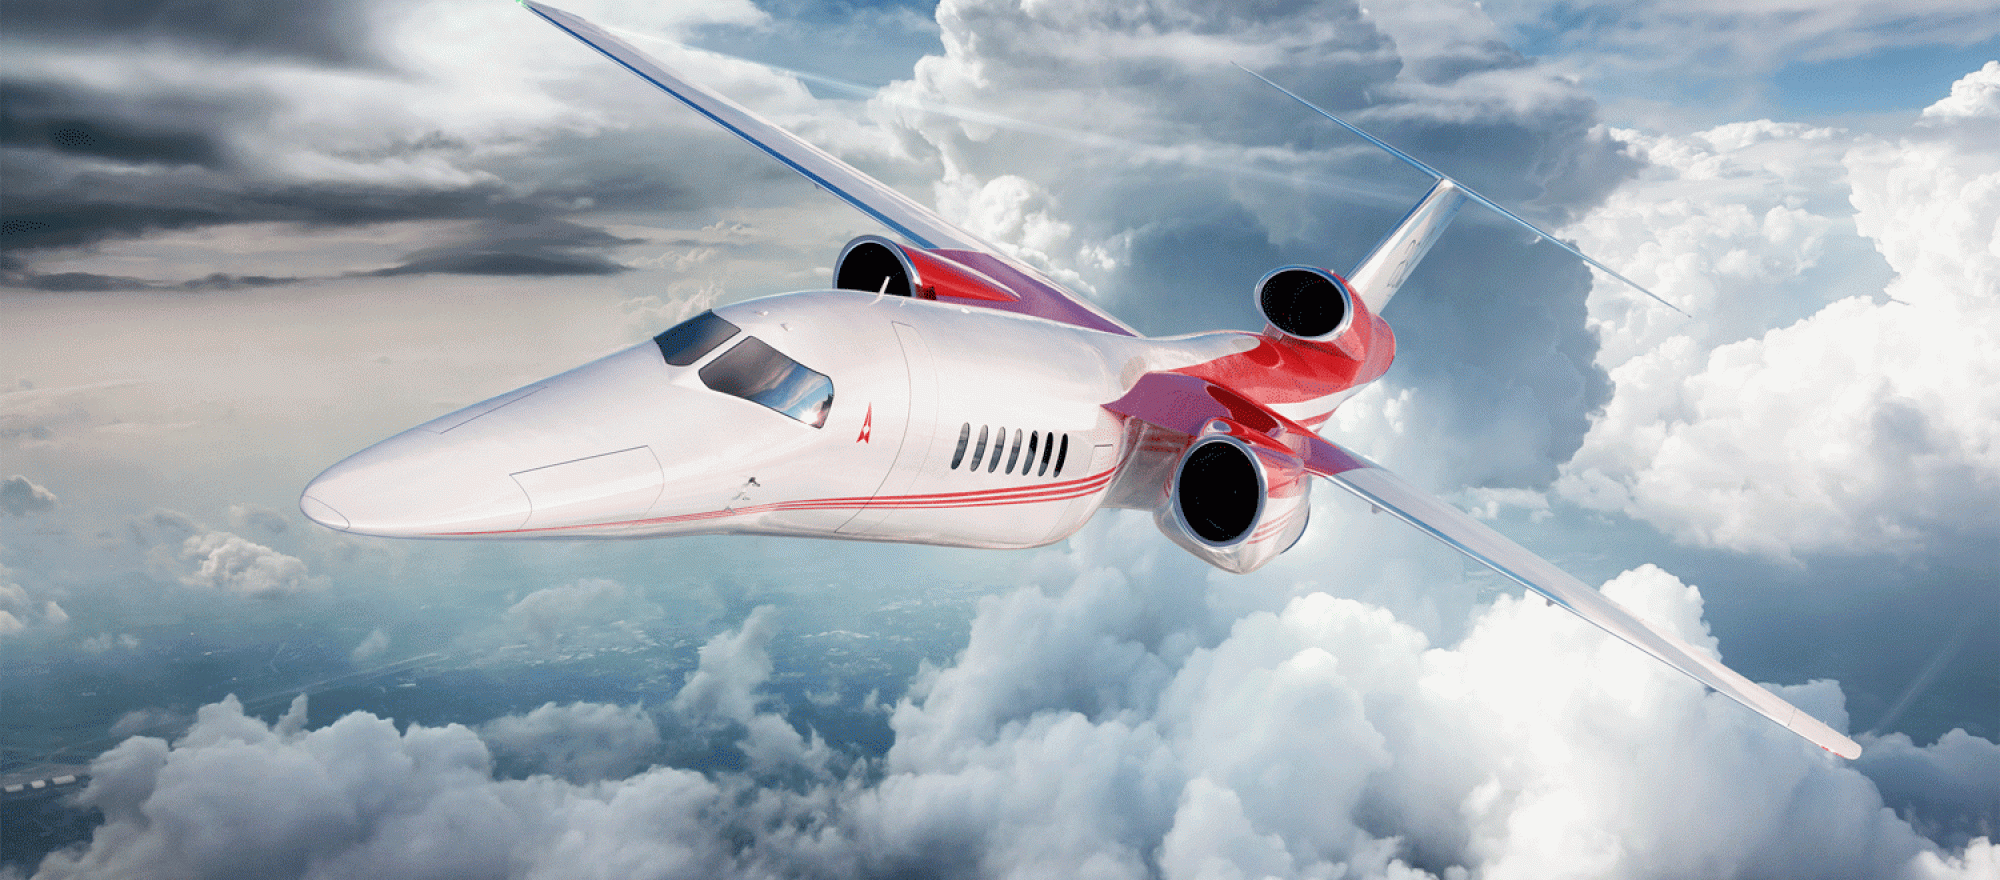 Aerion’s AS2 supersonic business jet is slated to carry 12 passengers at Mach 1.6 with a minimum projected range of 4,750 nm (8,800 km).